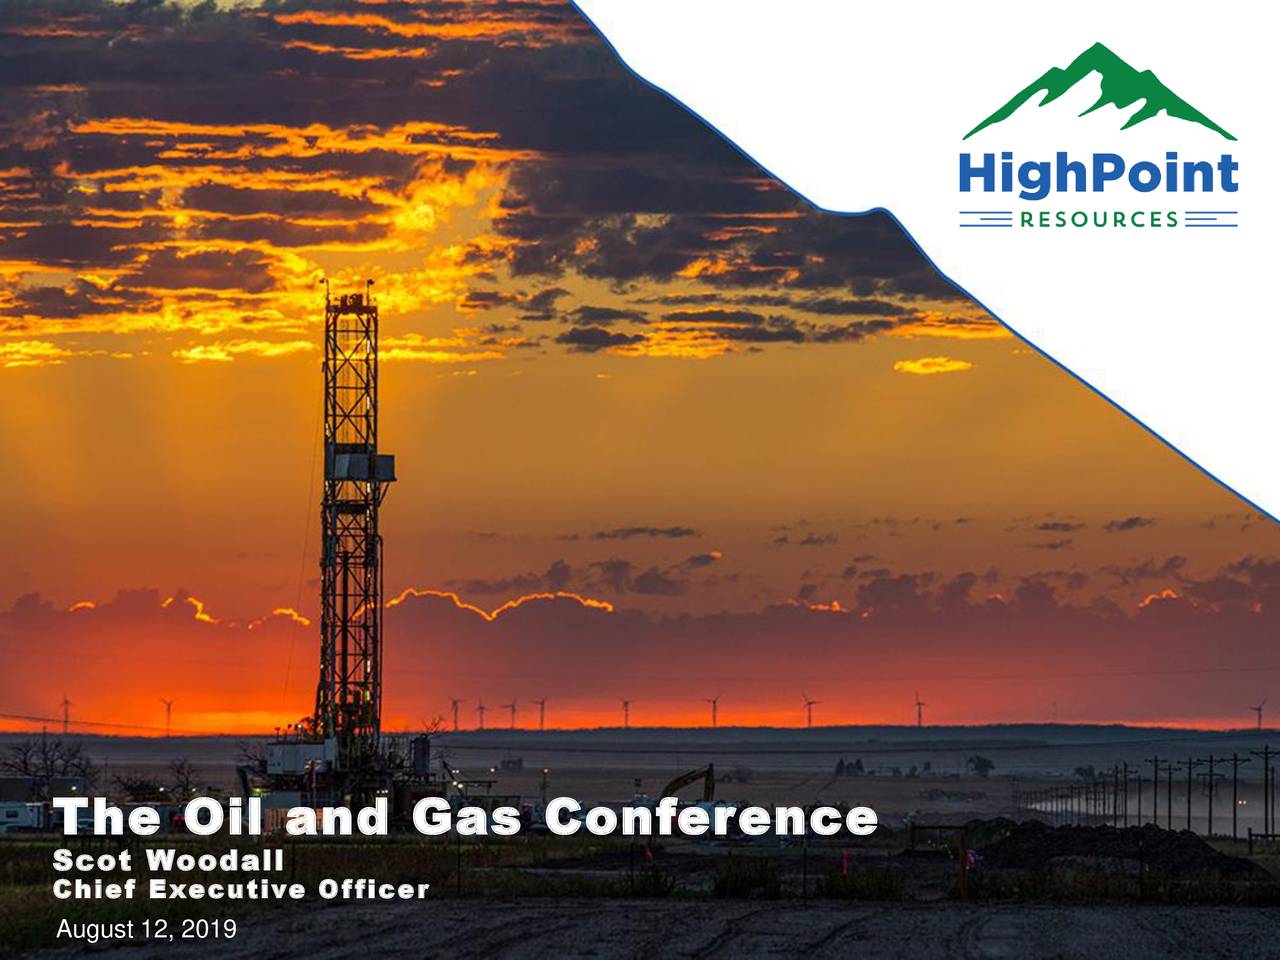 HighPoint Resources (HPR) Presents At Oil & Gas Conference